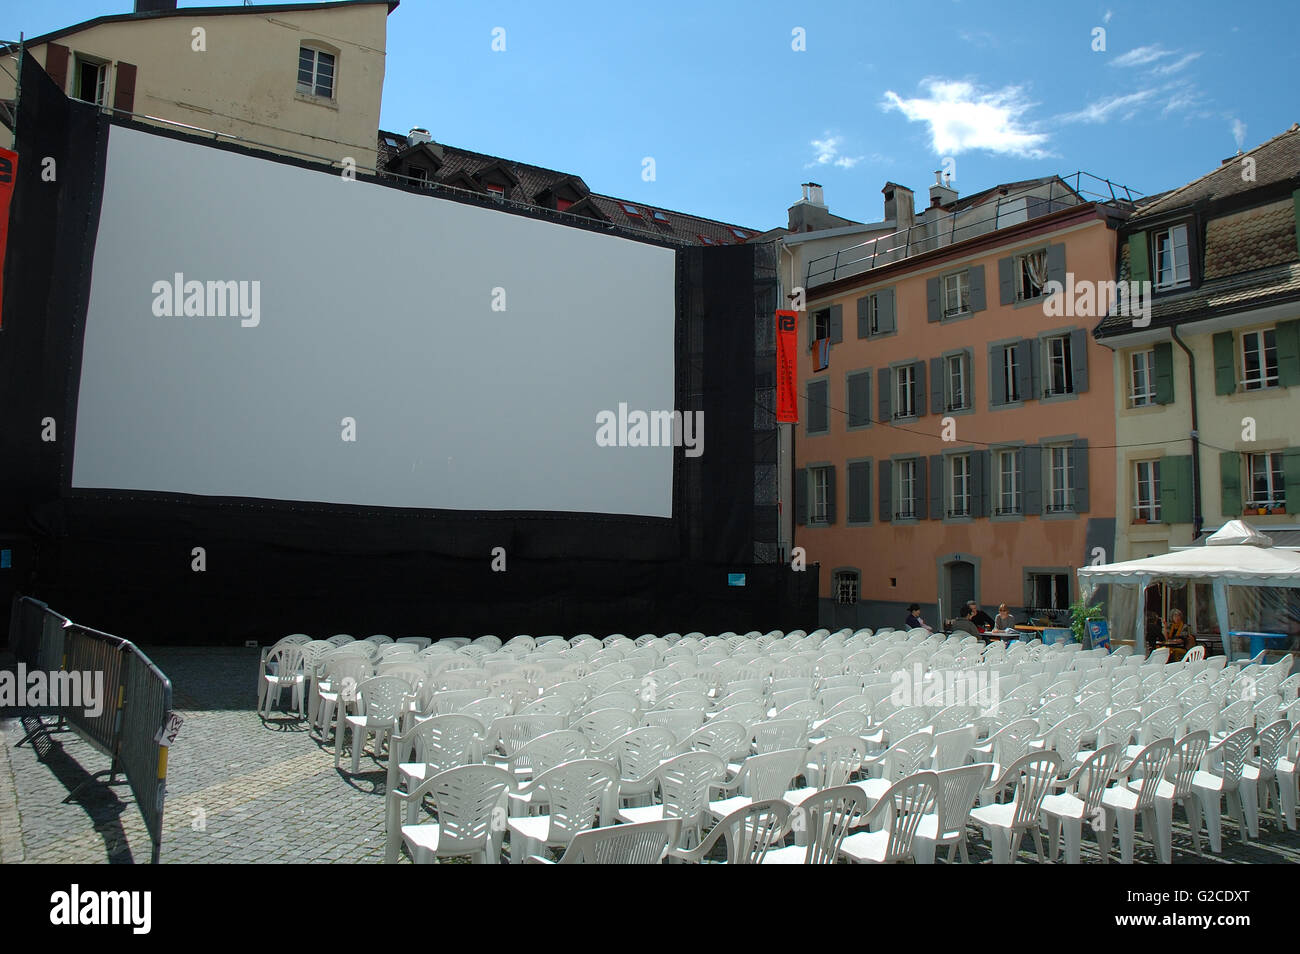 Vevey, Switzerland - August 16, 2014: Open air cinema in Vevey in  Switzerland. Unidentified people visible Stock Photo - Alamy